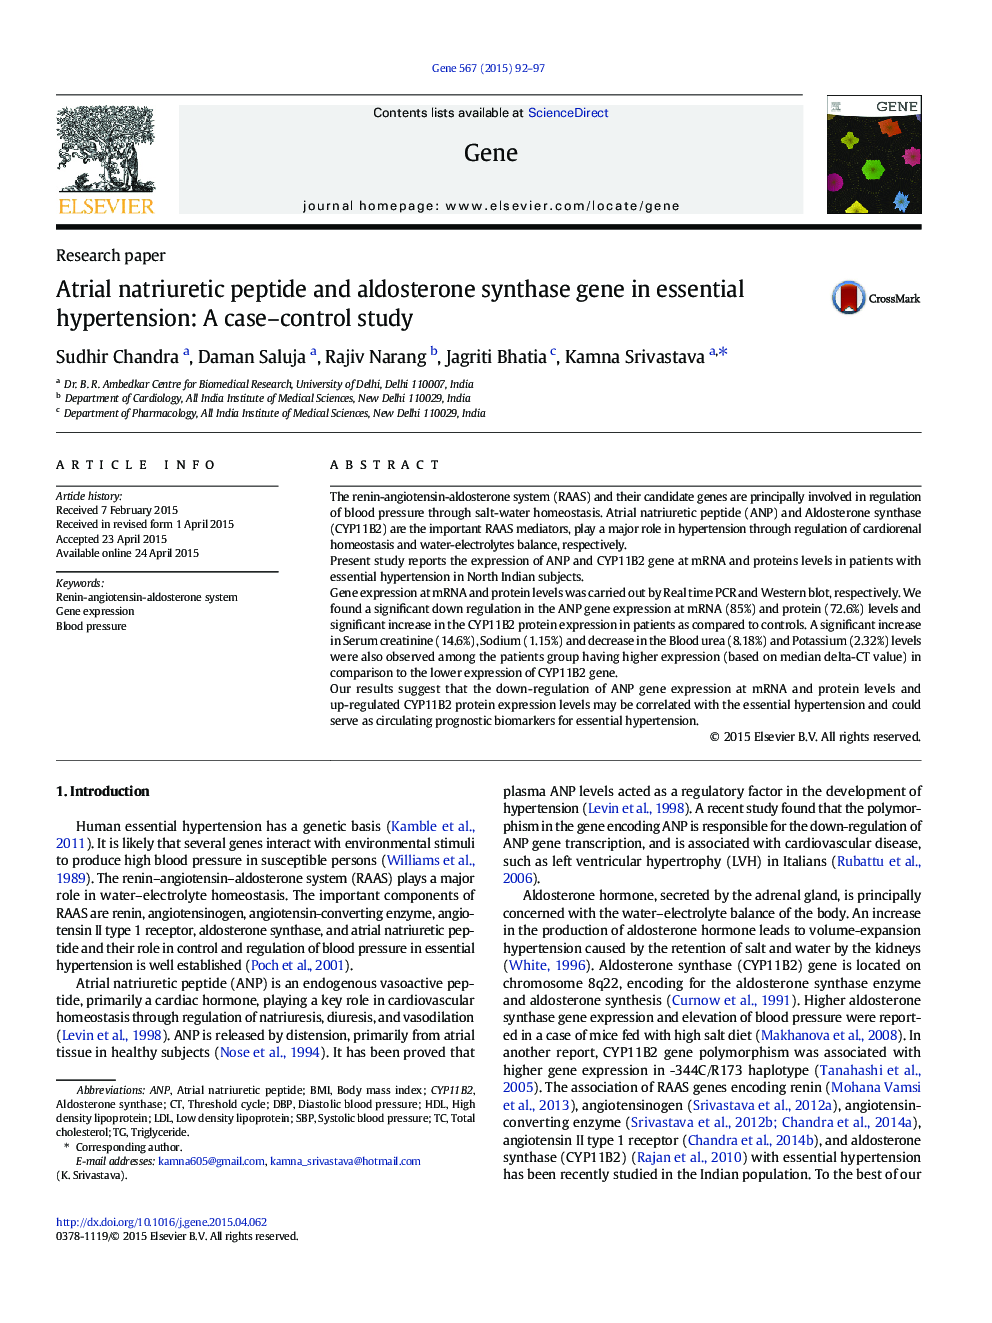 Atrial natriuretic peptide and aldosterone synthase gene in essential hypertension: A case–control study